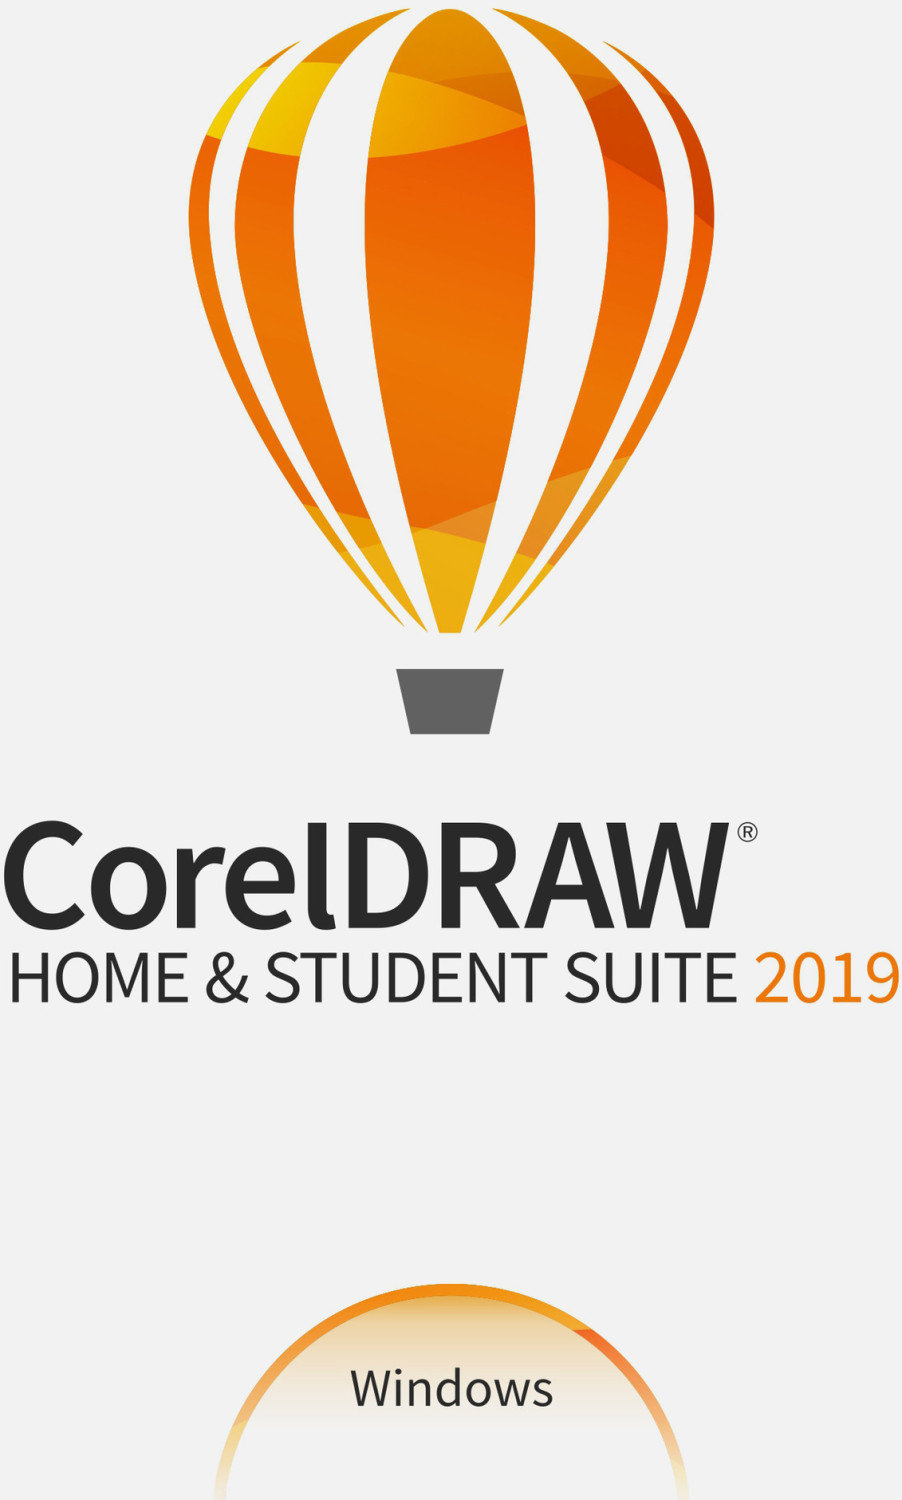 Coreldraw home and student